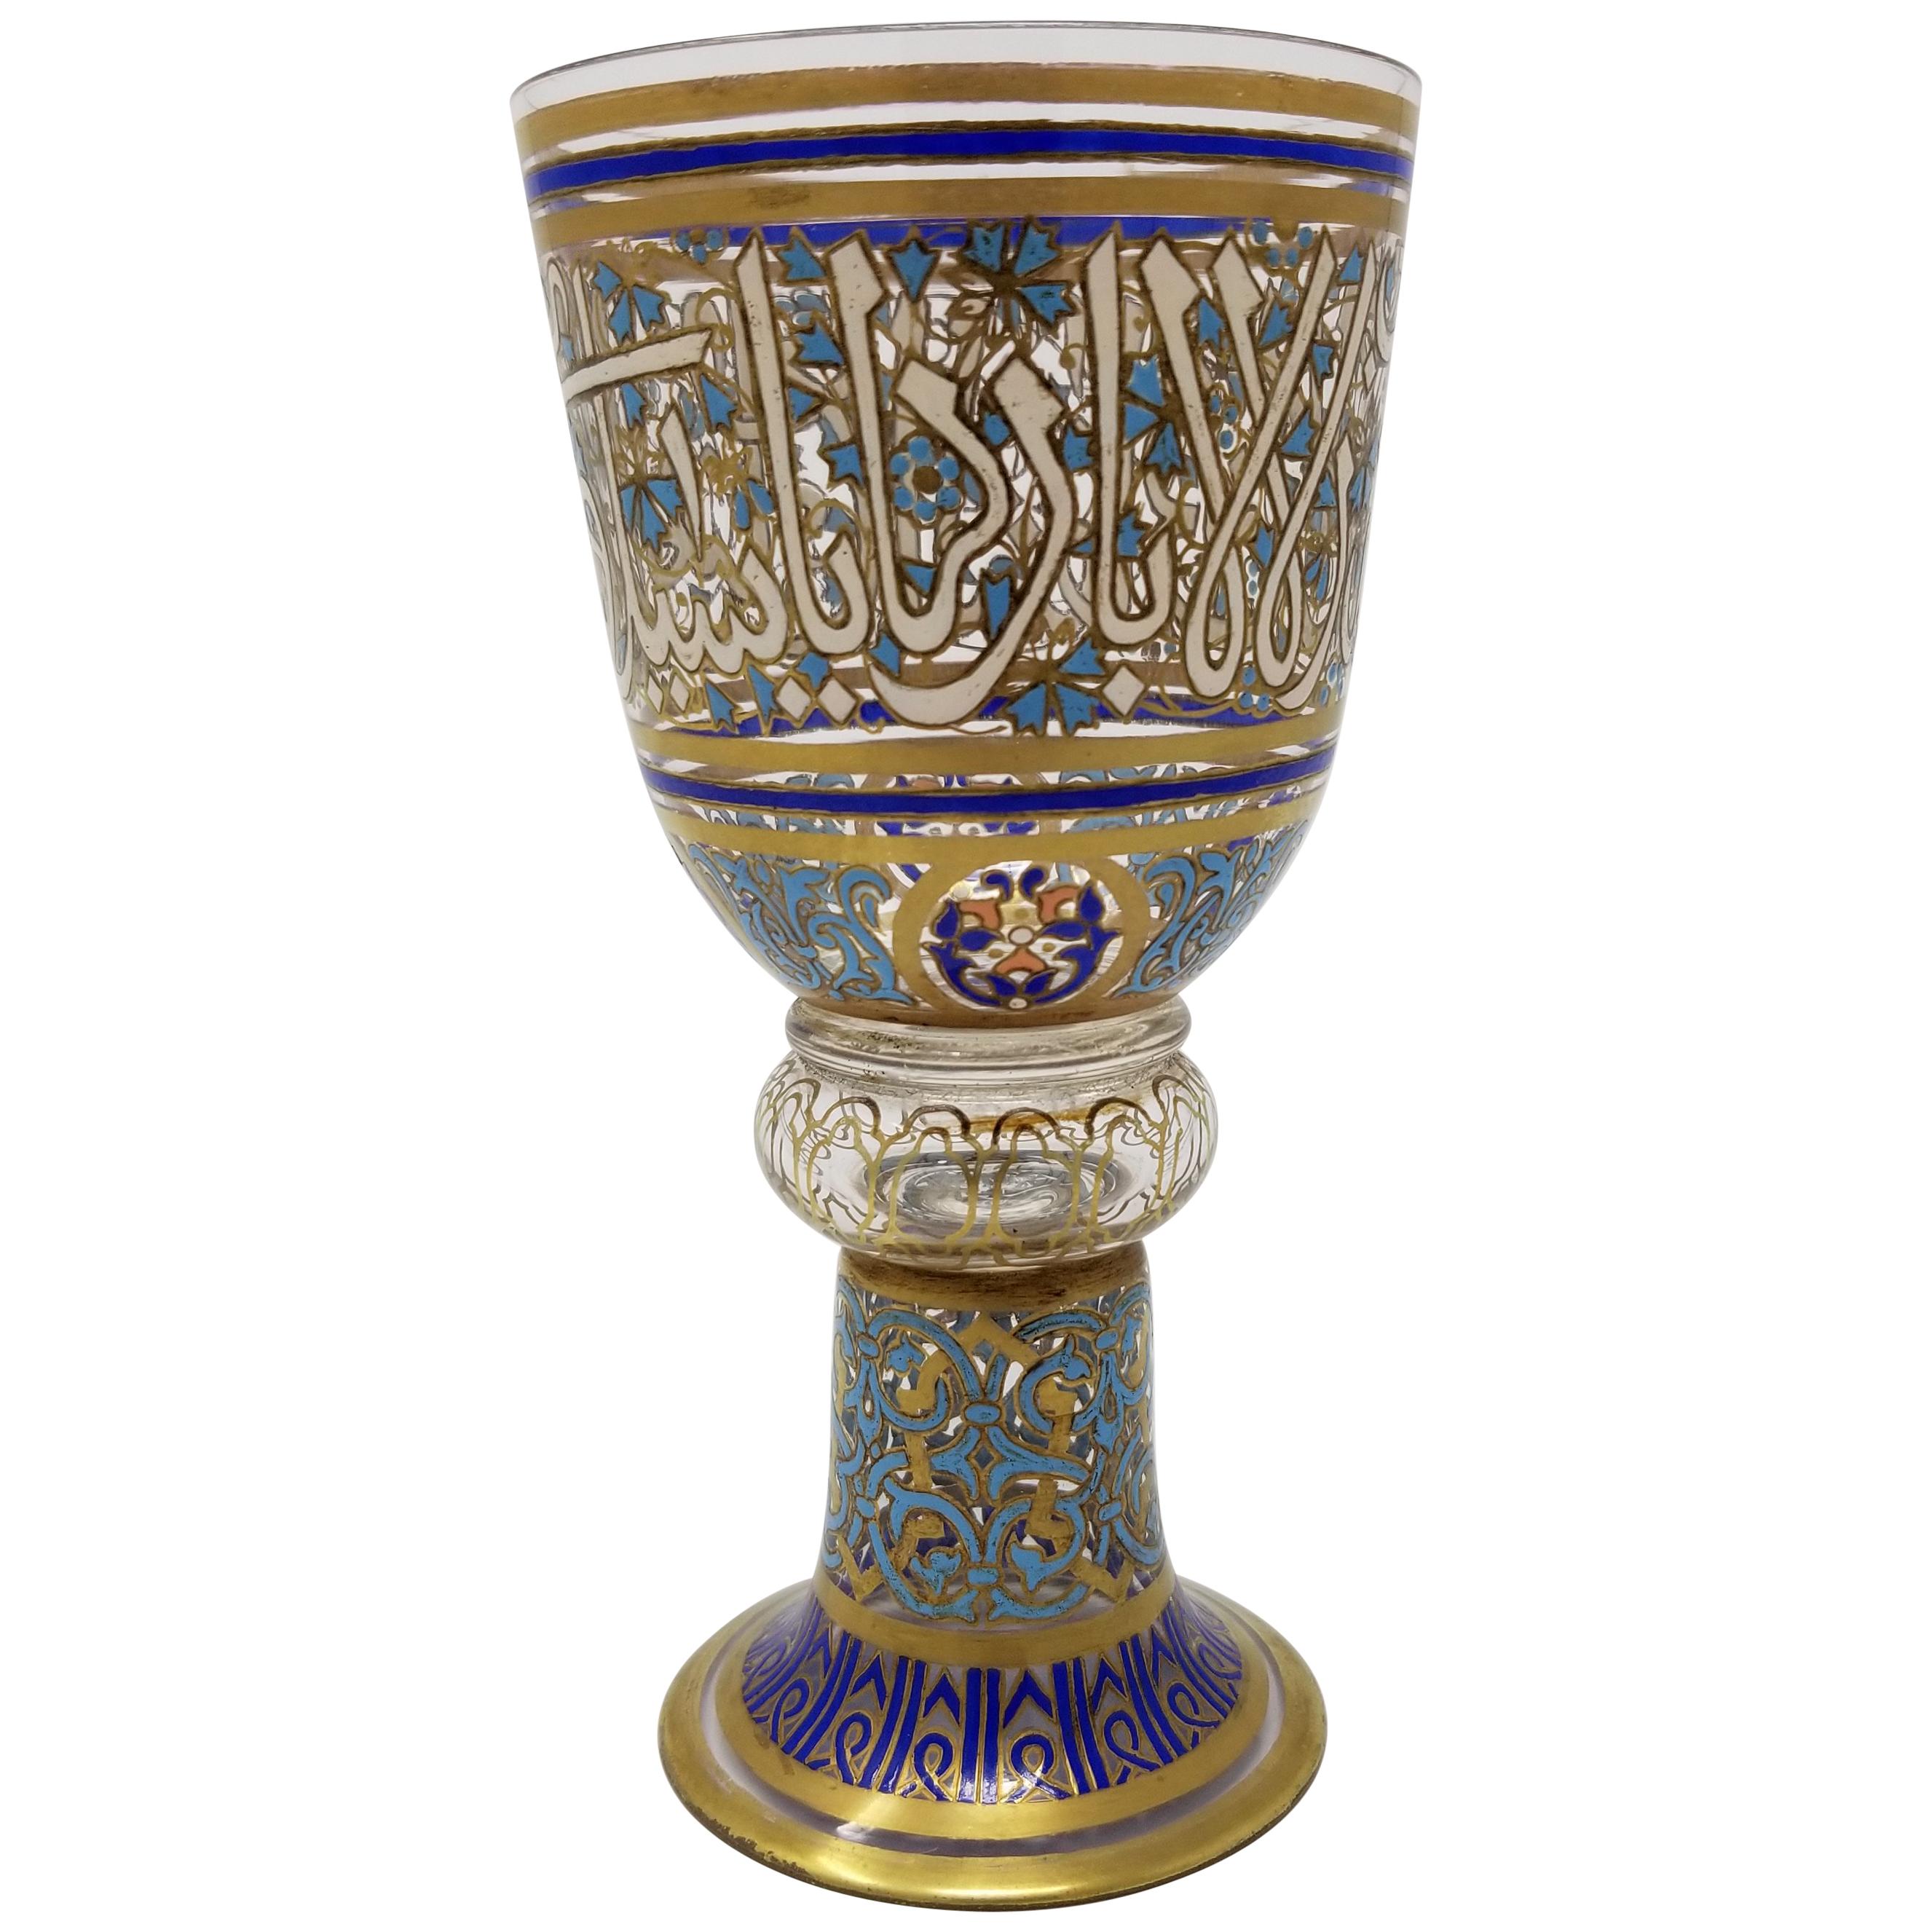 Antique Lobmeyr Ottoman Gilt and Enameled Glass Goblet with Islamic Calligraphy For Sale